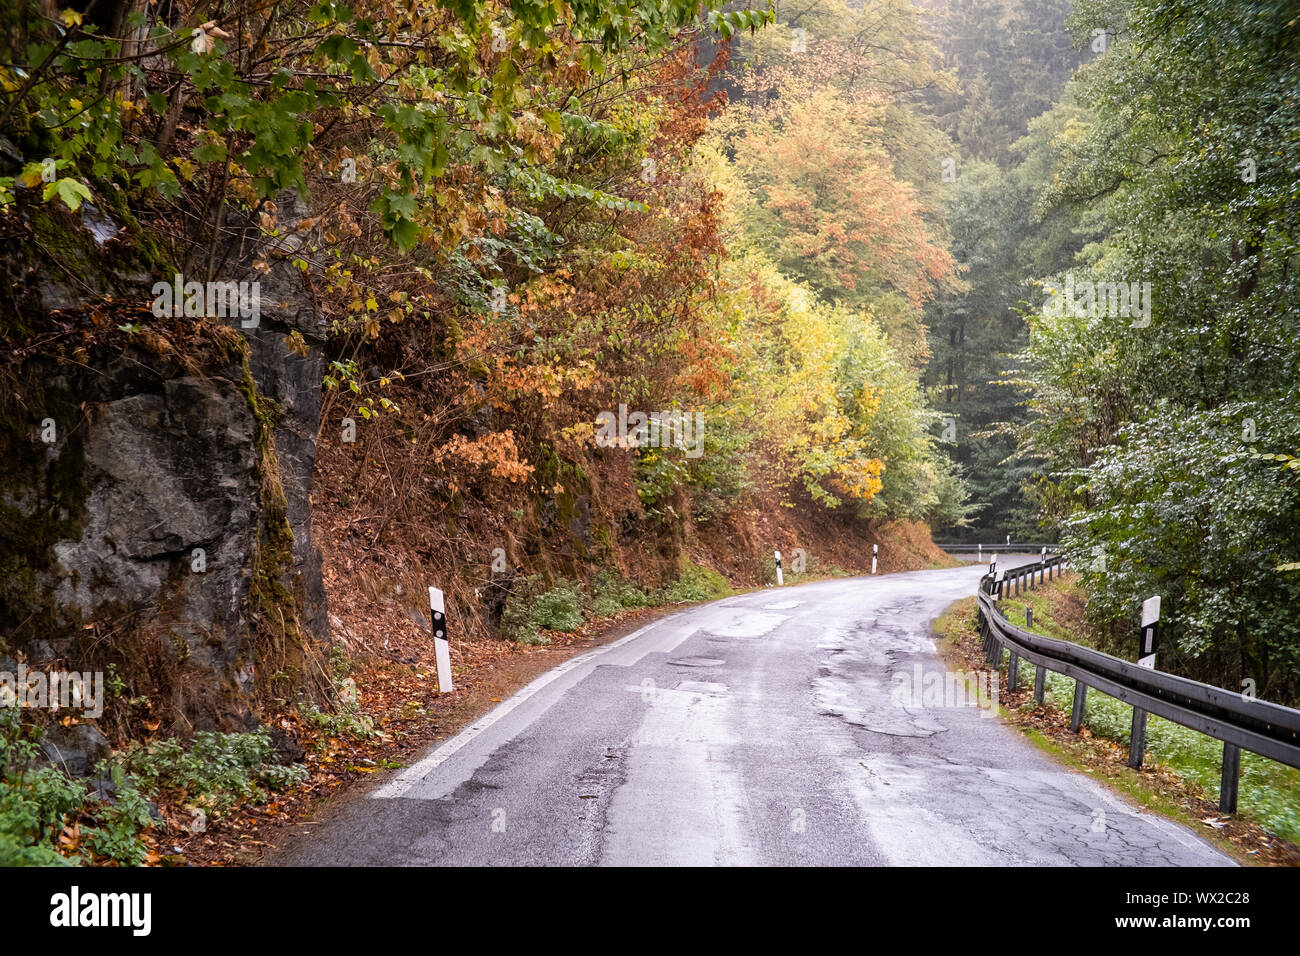 Autumn in road traffic increased respect Stock Photo